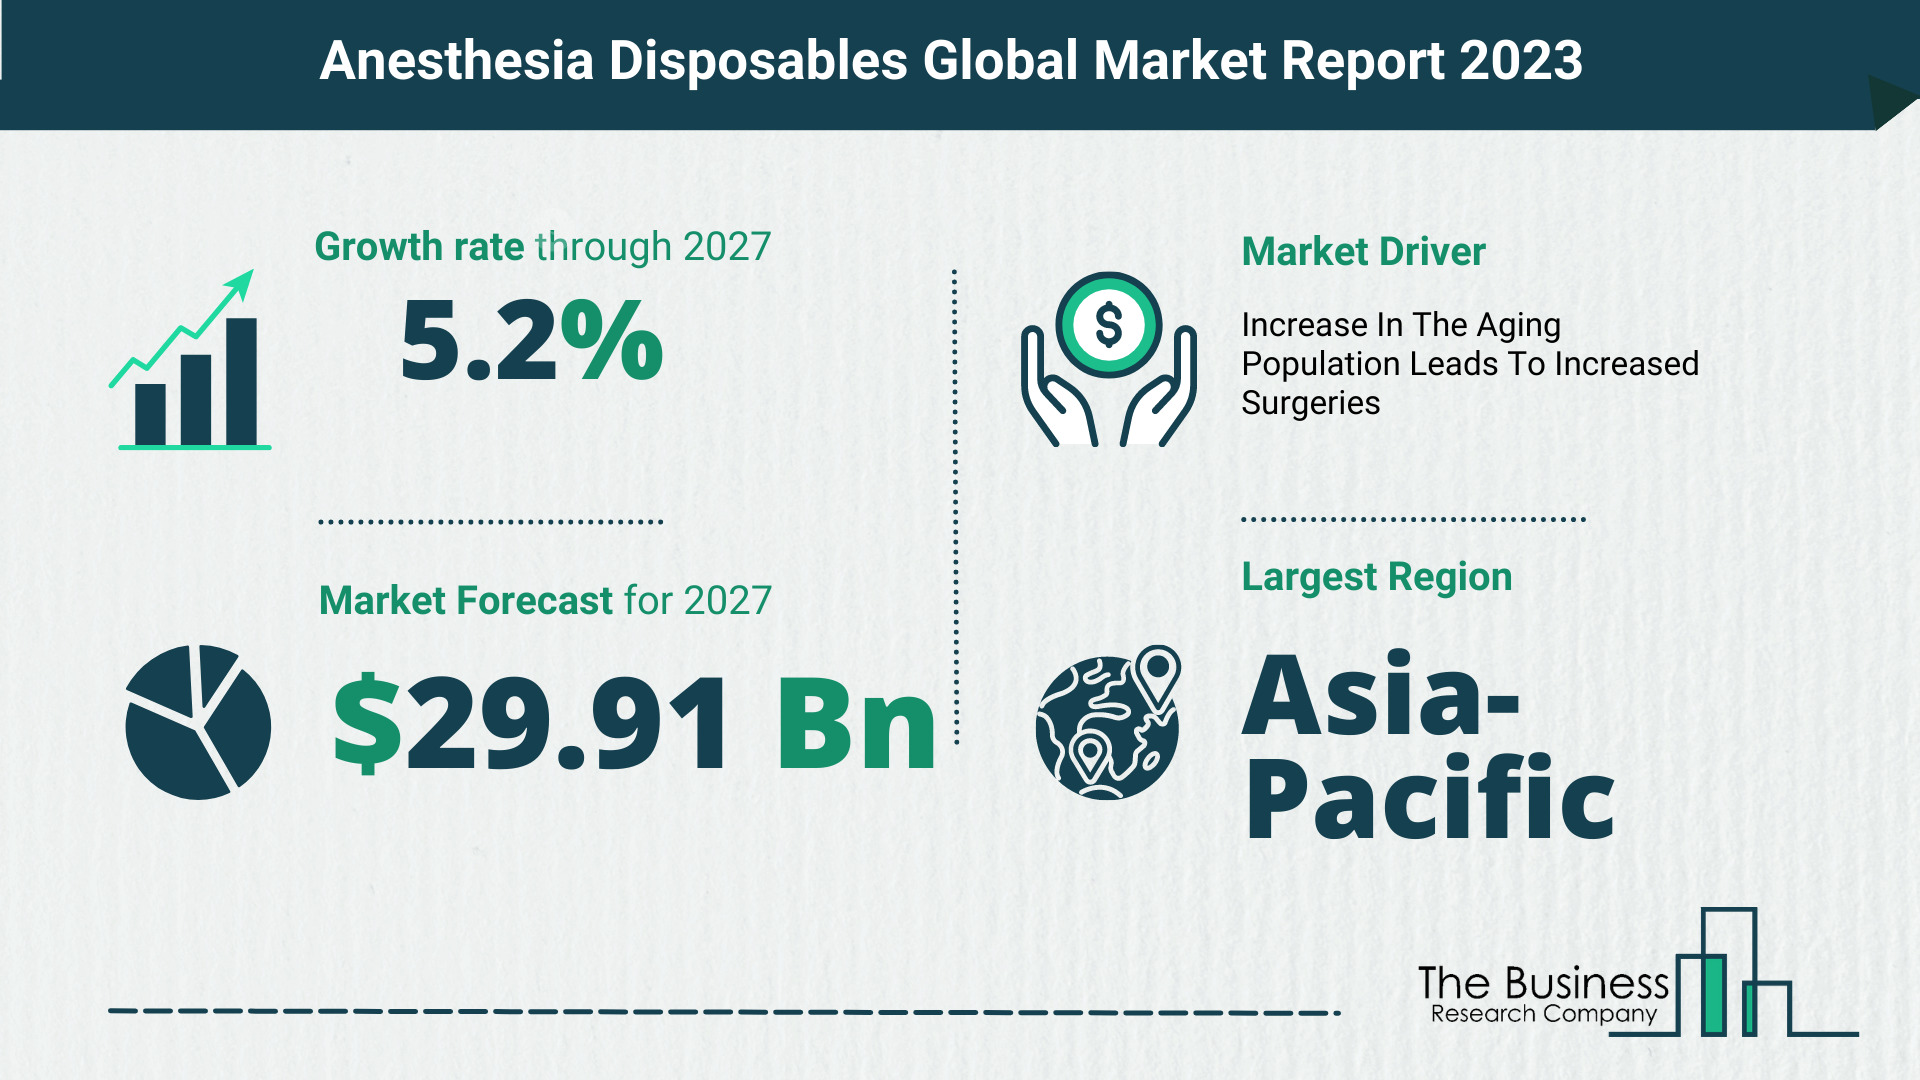 Global Anesthesia Disposables Market